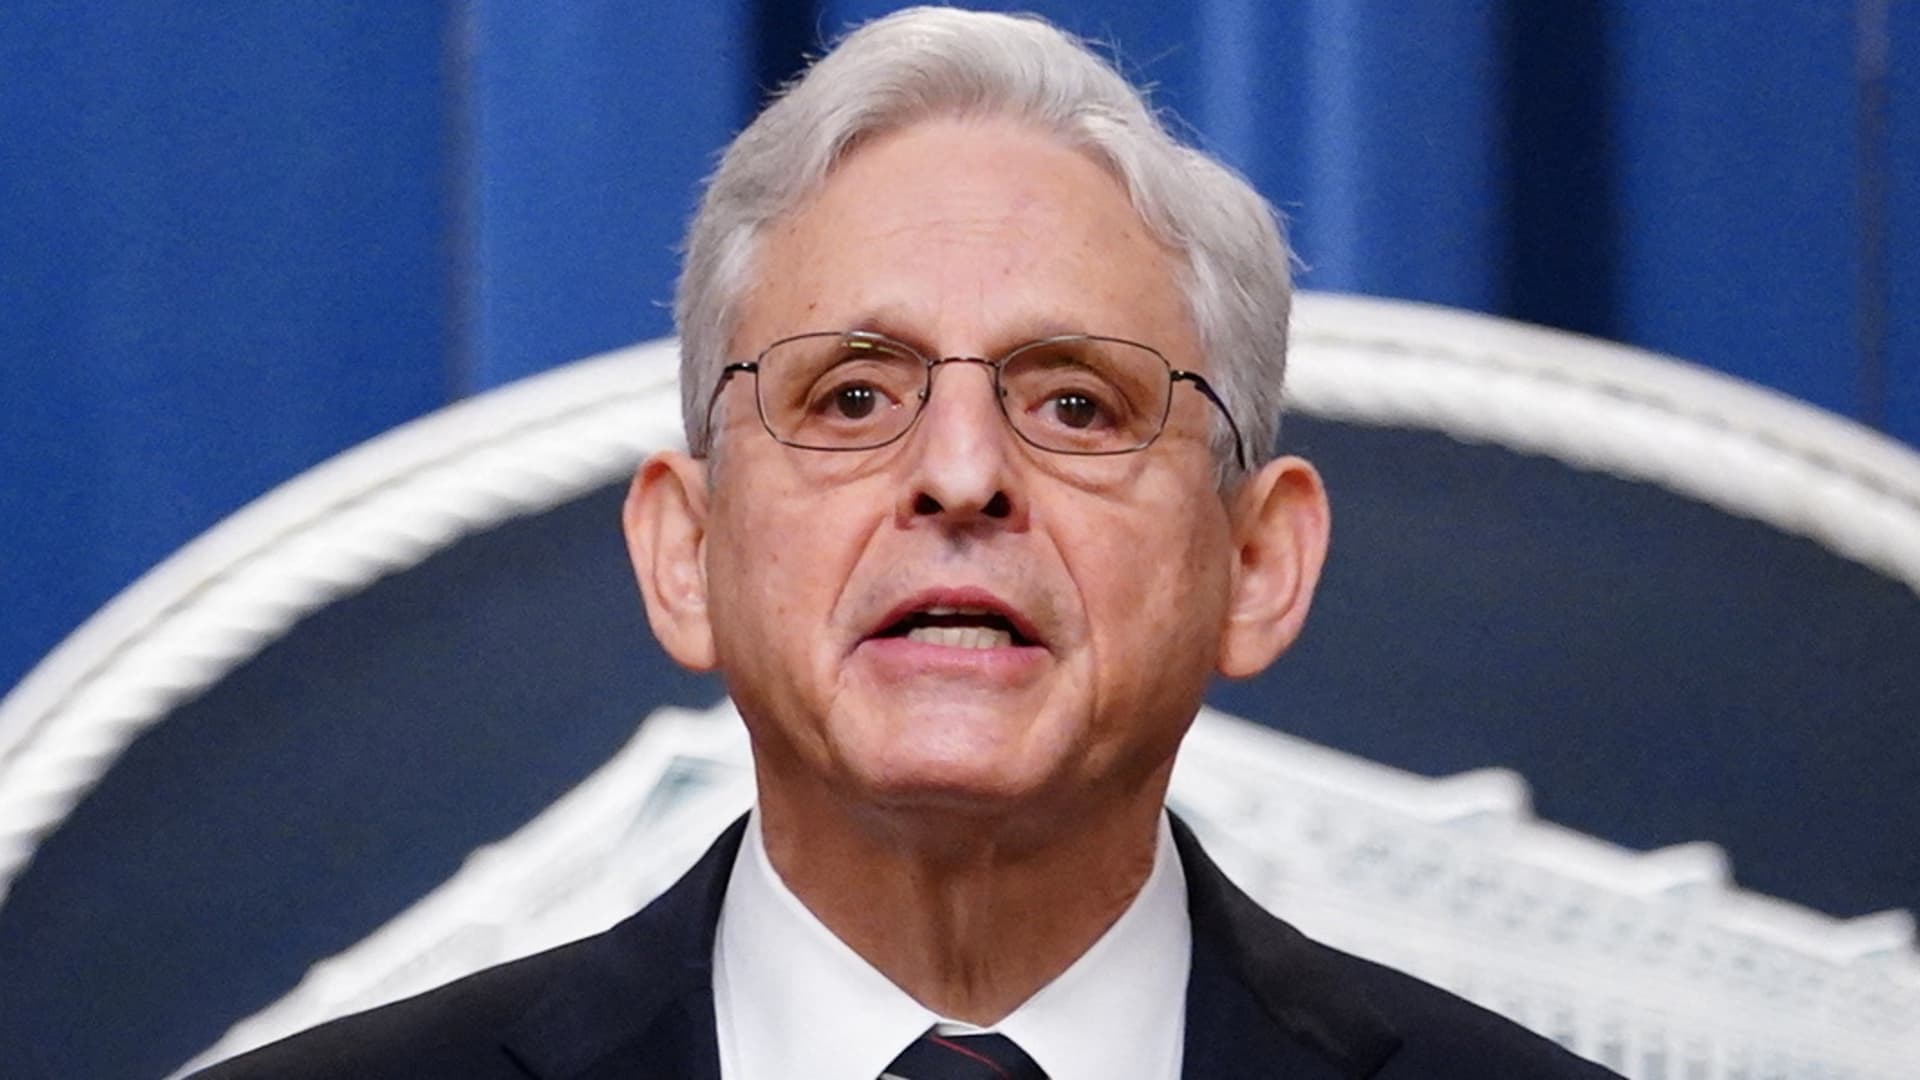 U.S. Attorney General Merrick Garland announces that the U.S. Justice Department has filed an anti-trust lawsuit against Alphabet's Google over allegations that the company abused its dominance of the digital advertising business, during an appearance in the Justice Department's briefing room in Washington, January 24, 2023. 